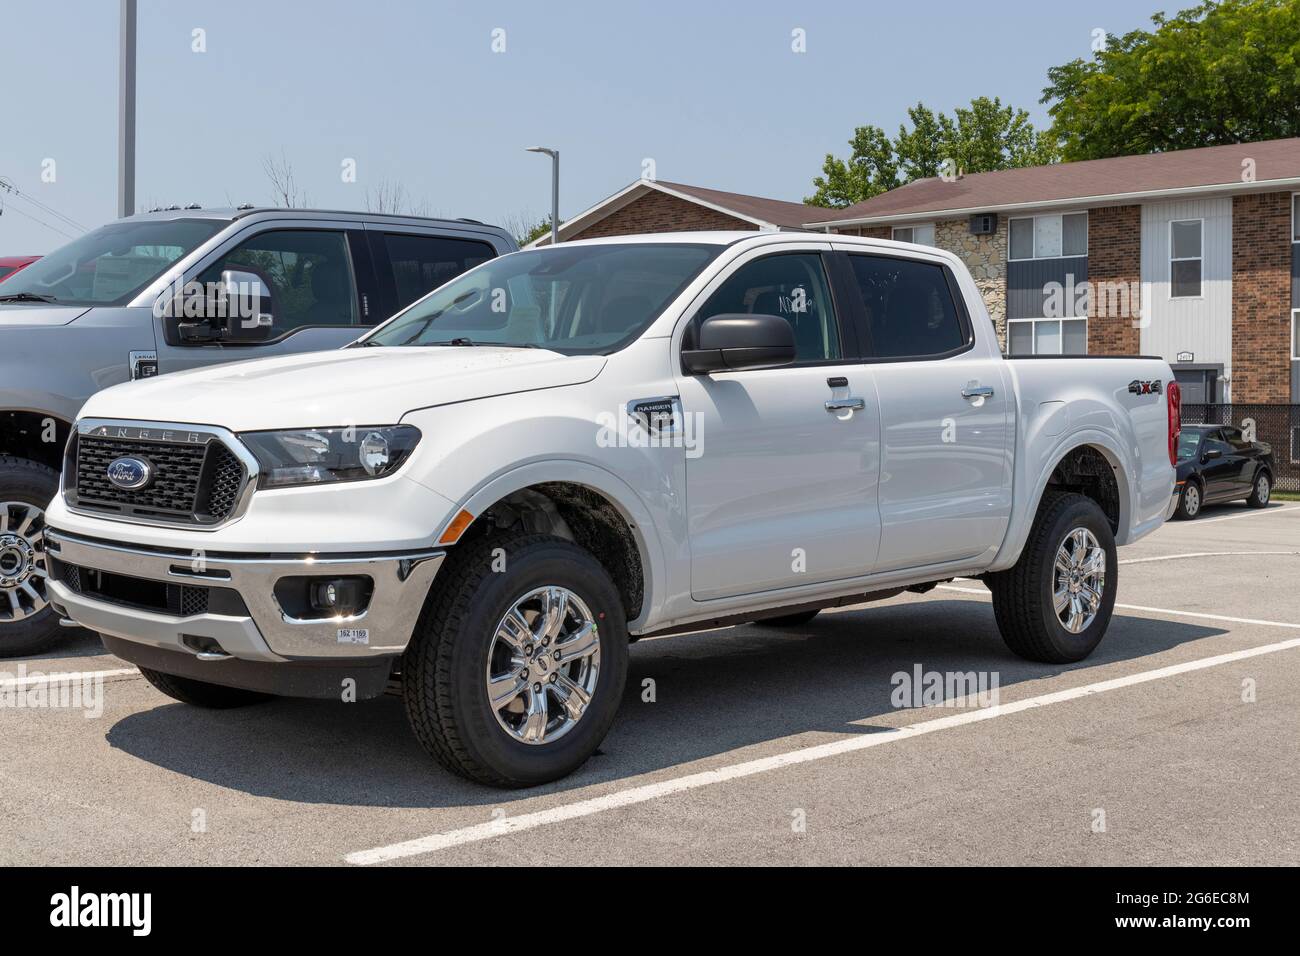 Kokomo - Circa July 2021: Ford Ranger pickup truck display at a dealership. The Ranger name has been used on multiple light duty truck models sold by Stock Photo